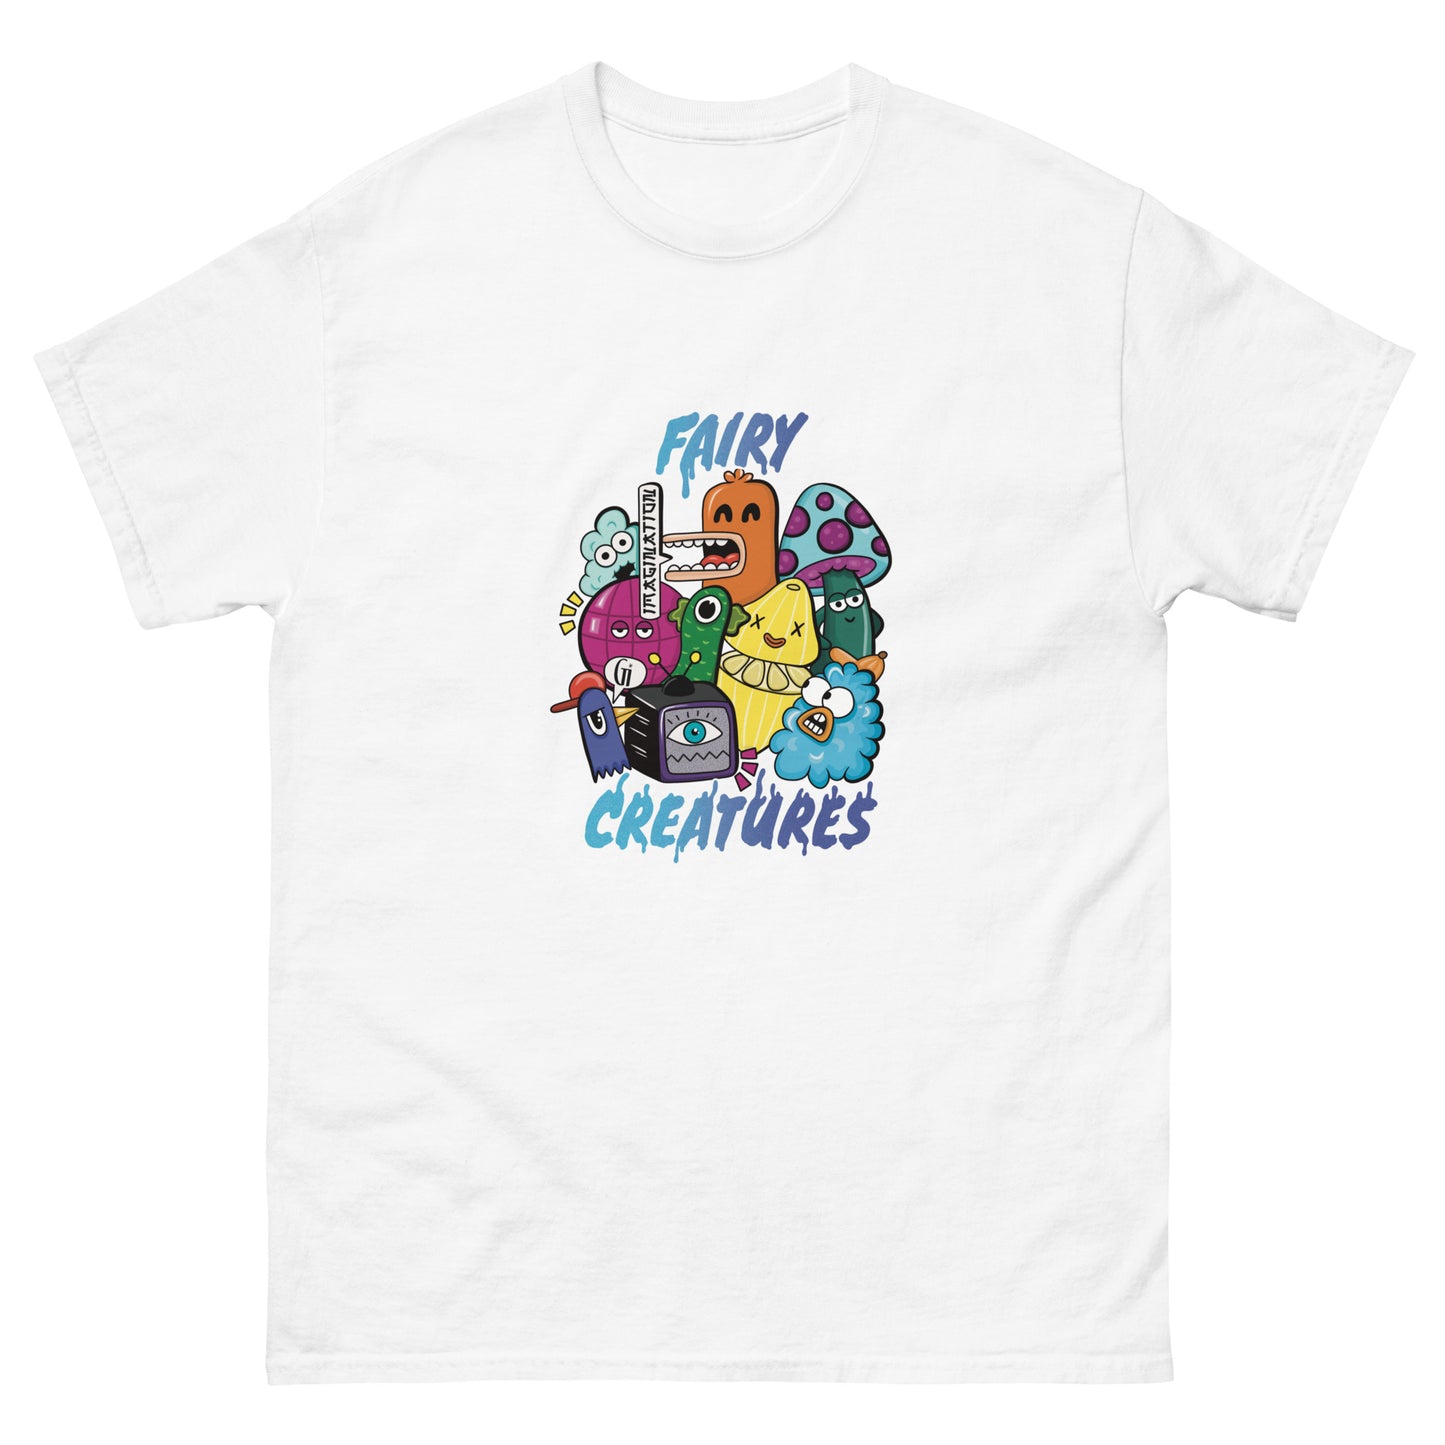 white color cotton t shirt with fairy creatures